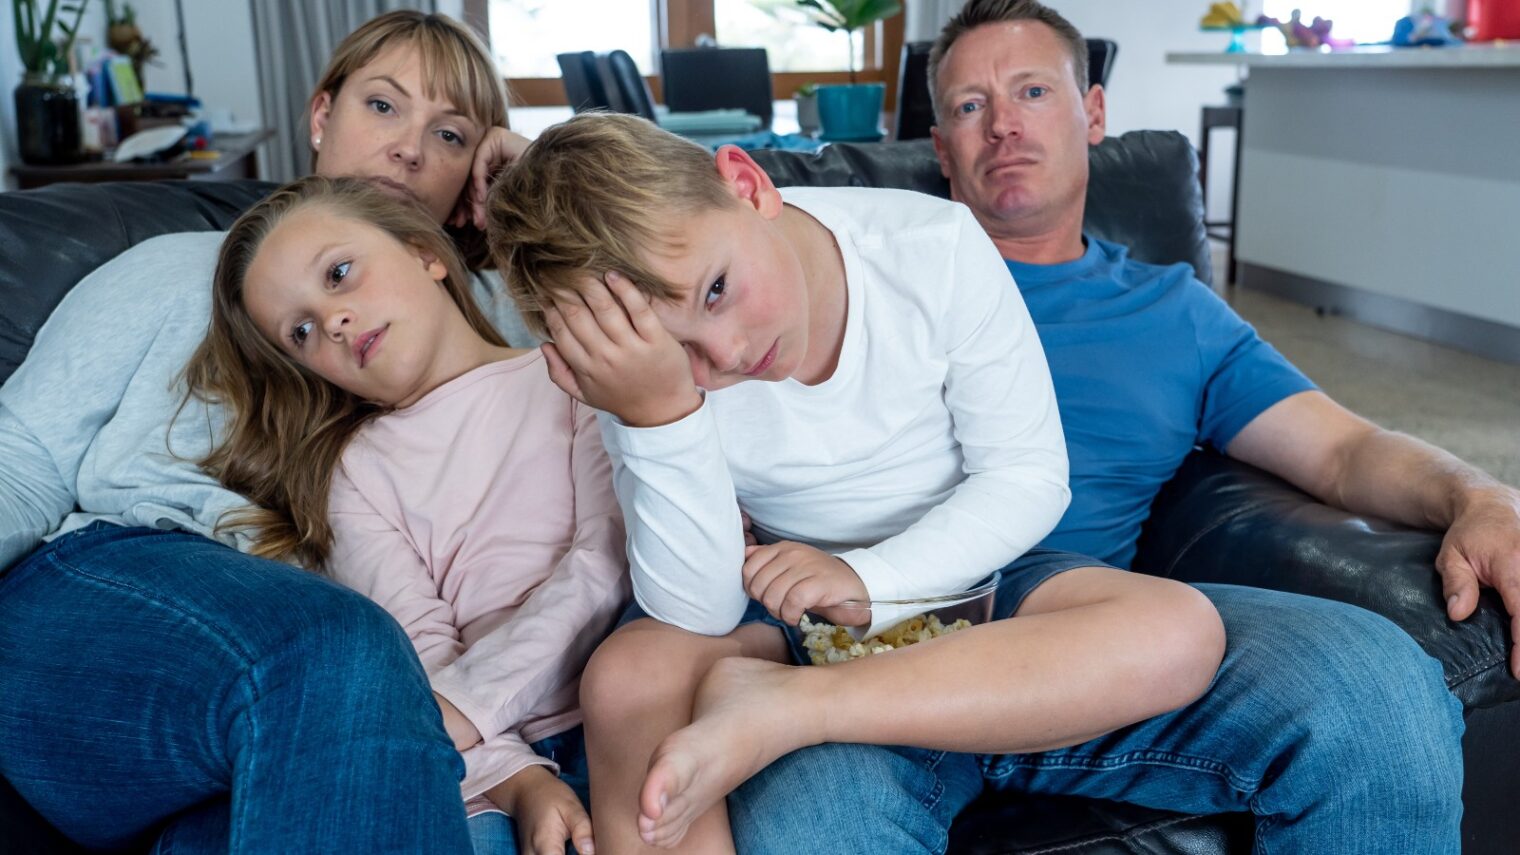 Lockdown leads parents to use morbid humor to display the very real difficulties they were encountering. Photo by Sam Wordley via Shutterstock.com